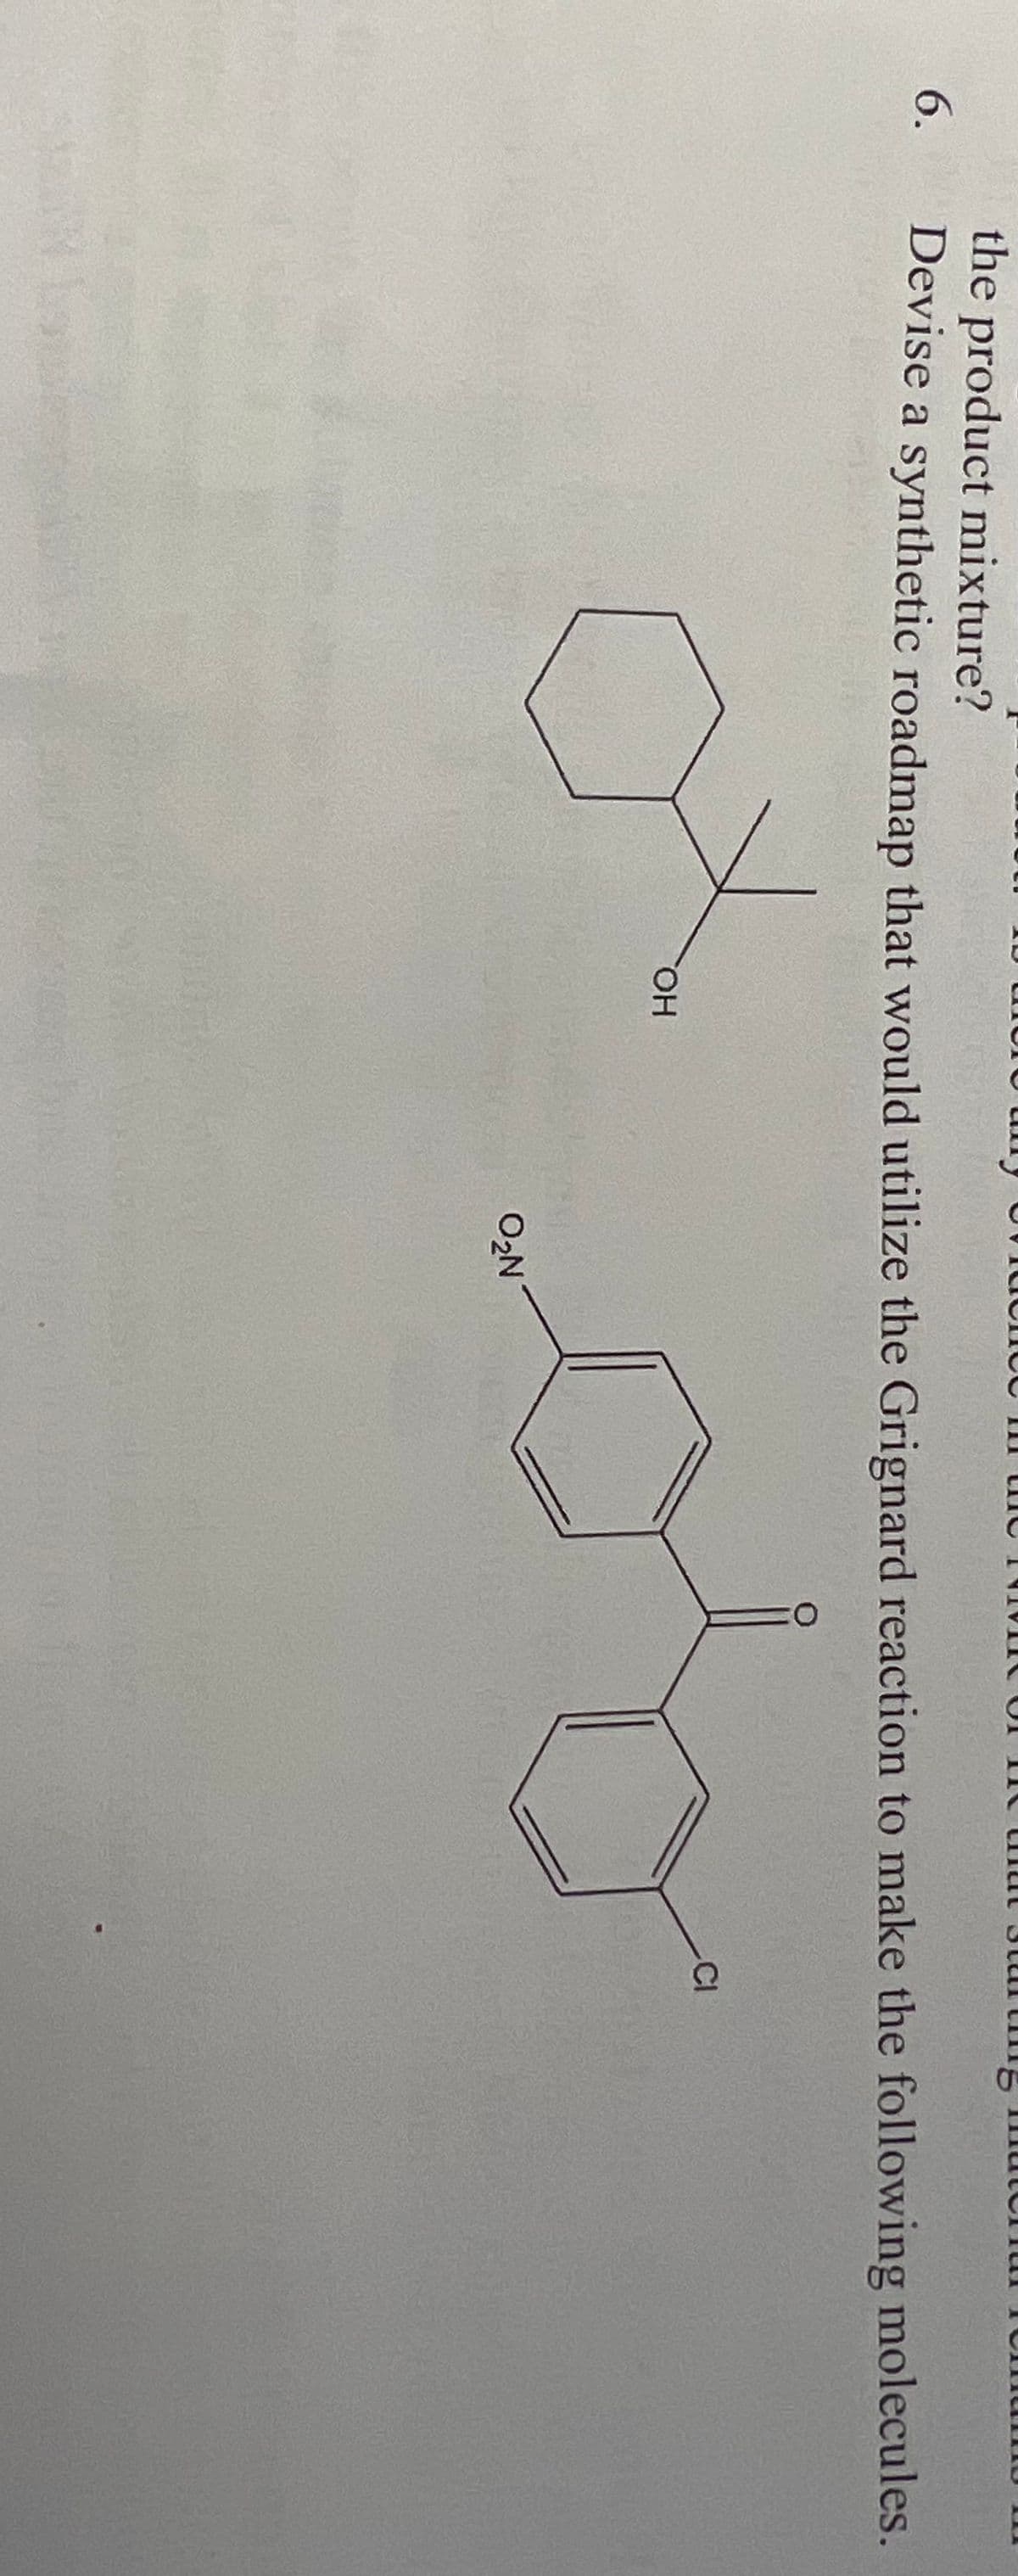 6.
the product mixture?
Devise a synthetic roadmap that would utilize the Grignard reaction to make the following molecules.
OH
CIL
O₂N
CI